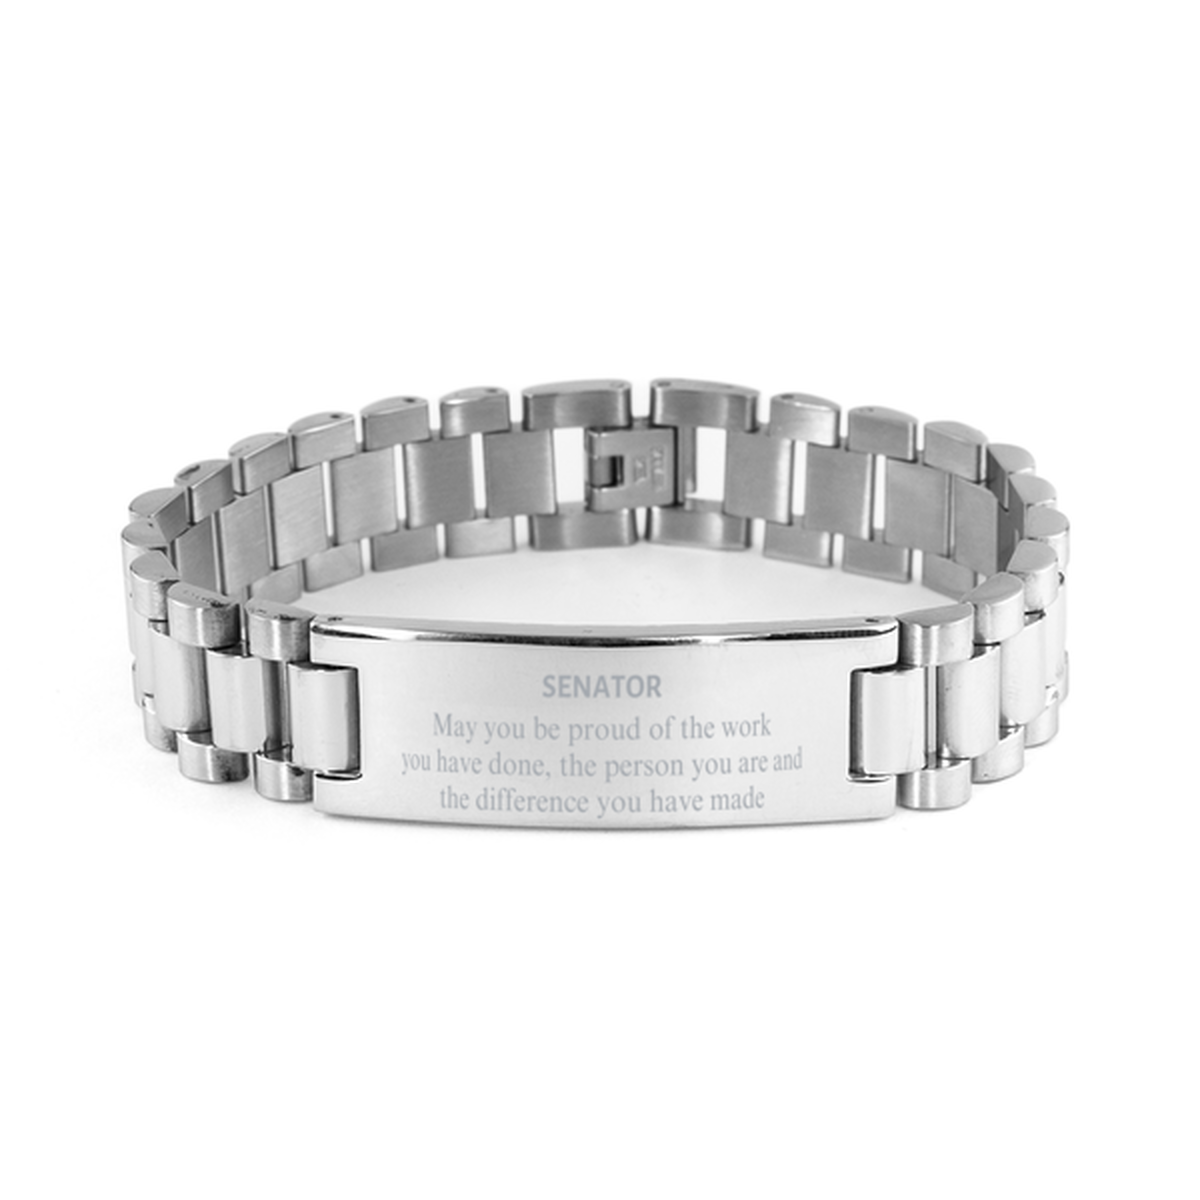 Senator May you be proud of the work you have done, Retirement Senator Ladder Stainless Steel Bracelet for Colleague Appreciation Gifts Amazing for Senator